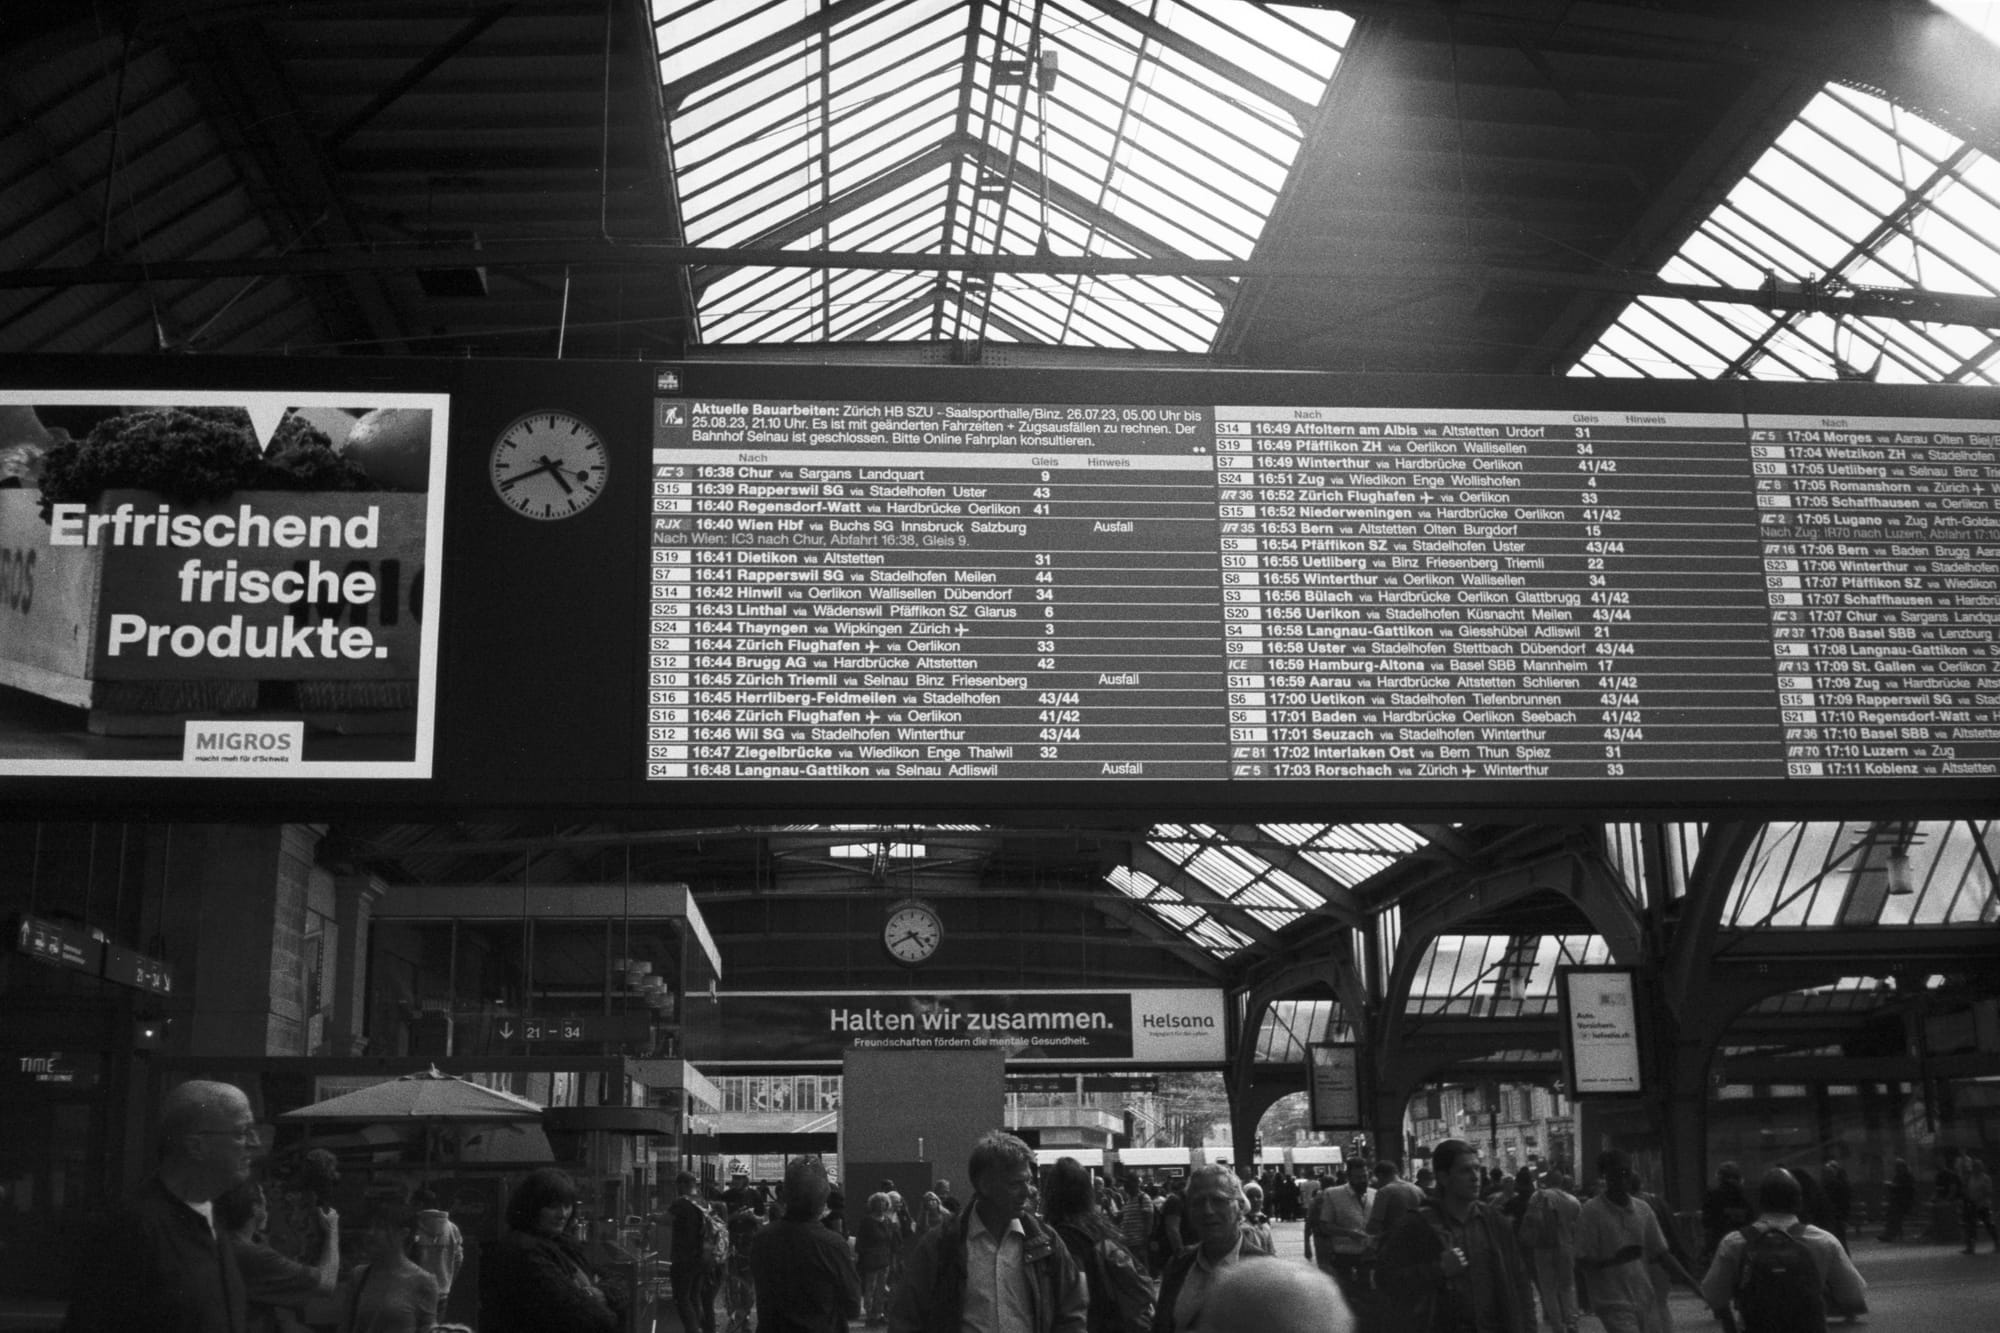 In black and white, a large railway station departures board for S-Bahn and ICE trains, in German. People bustle about the departures board below.